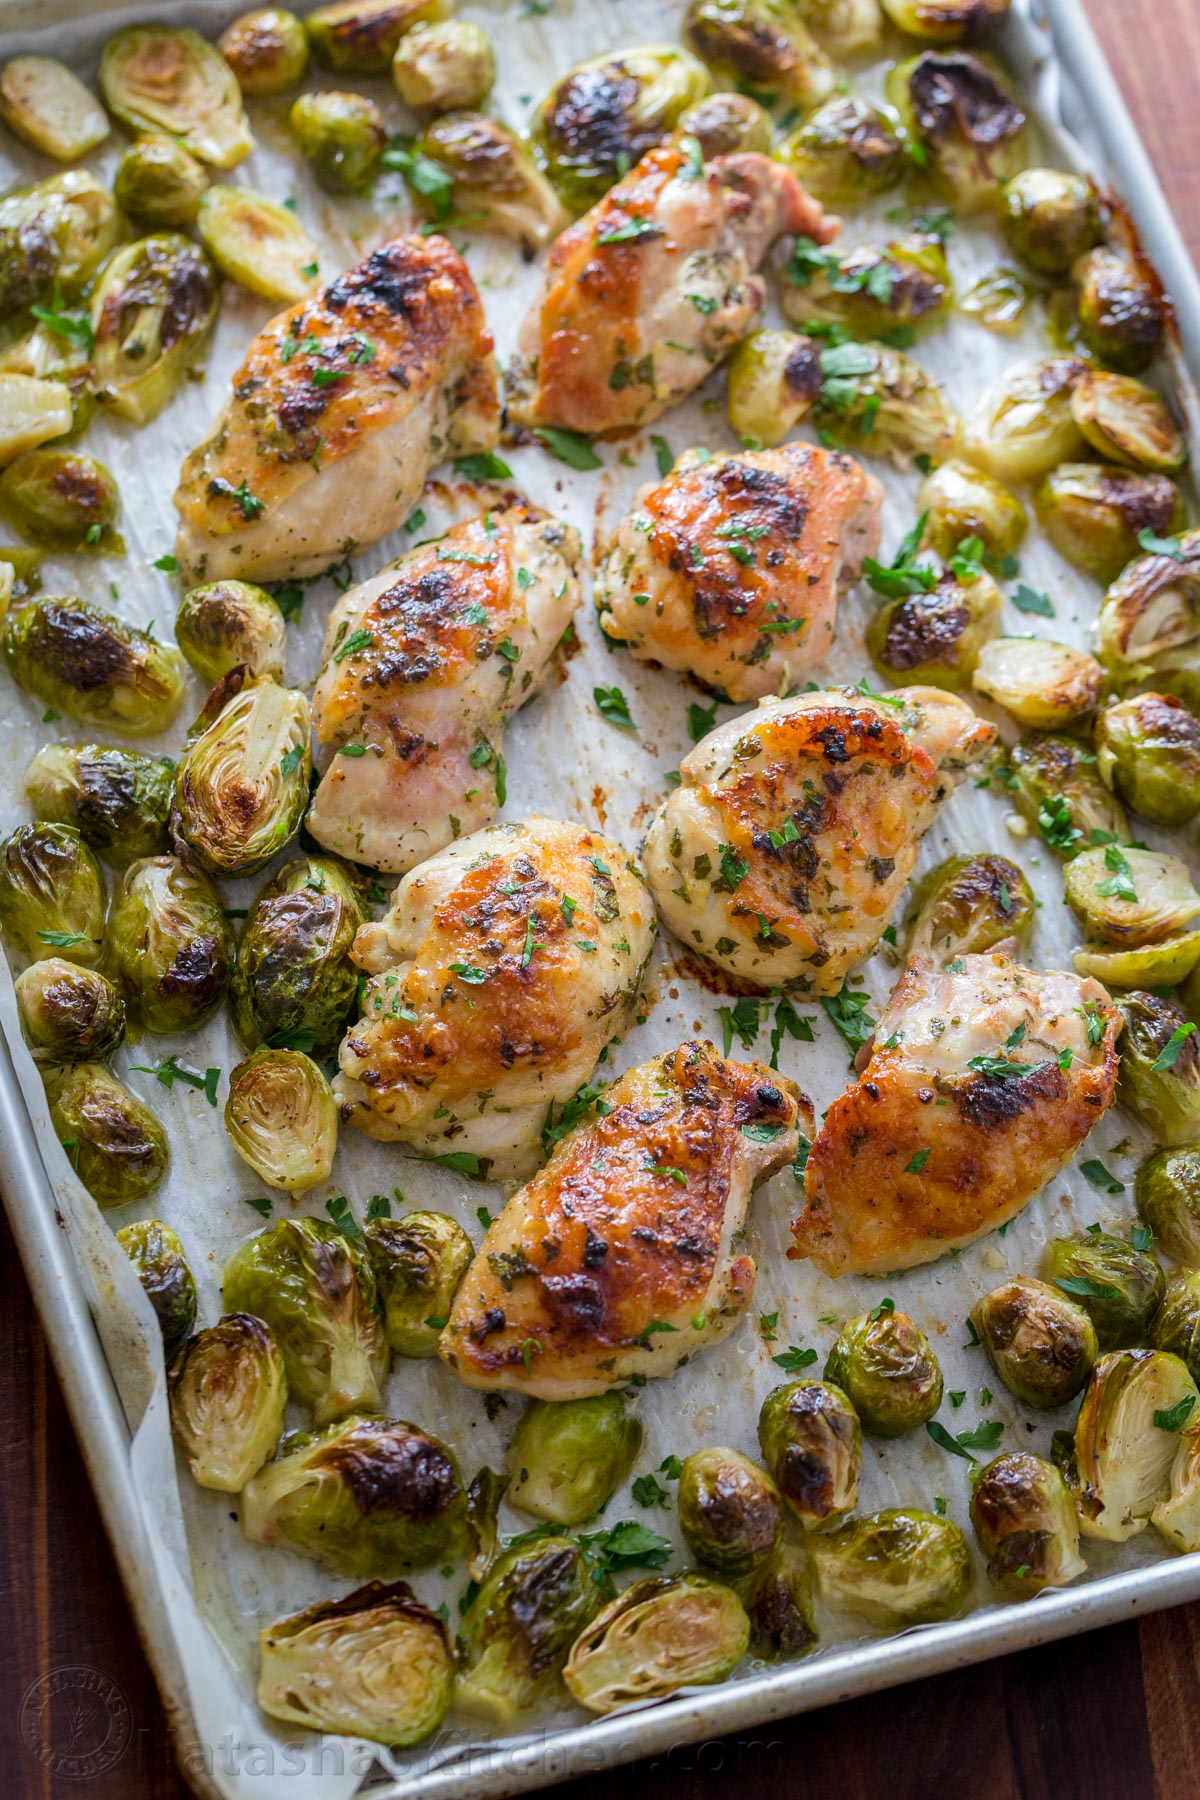 Garlic Dijon Chicken and Brussels Sprouts